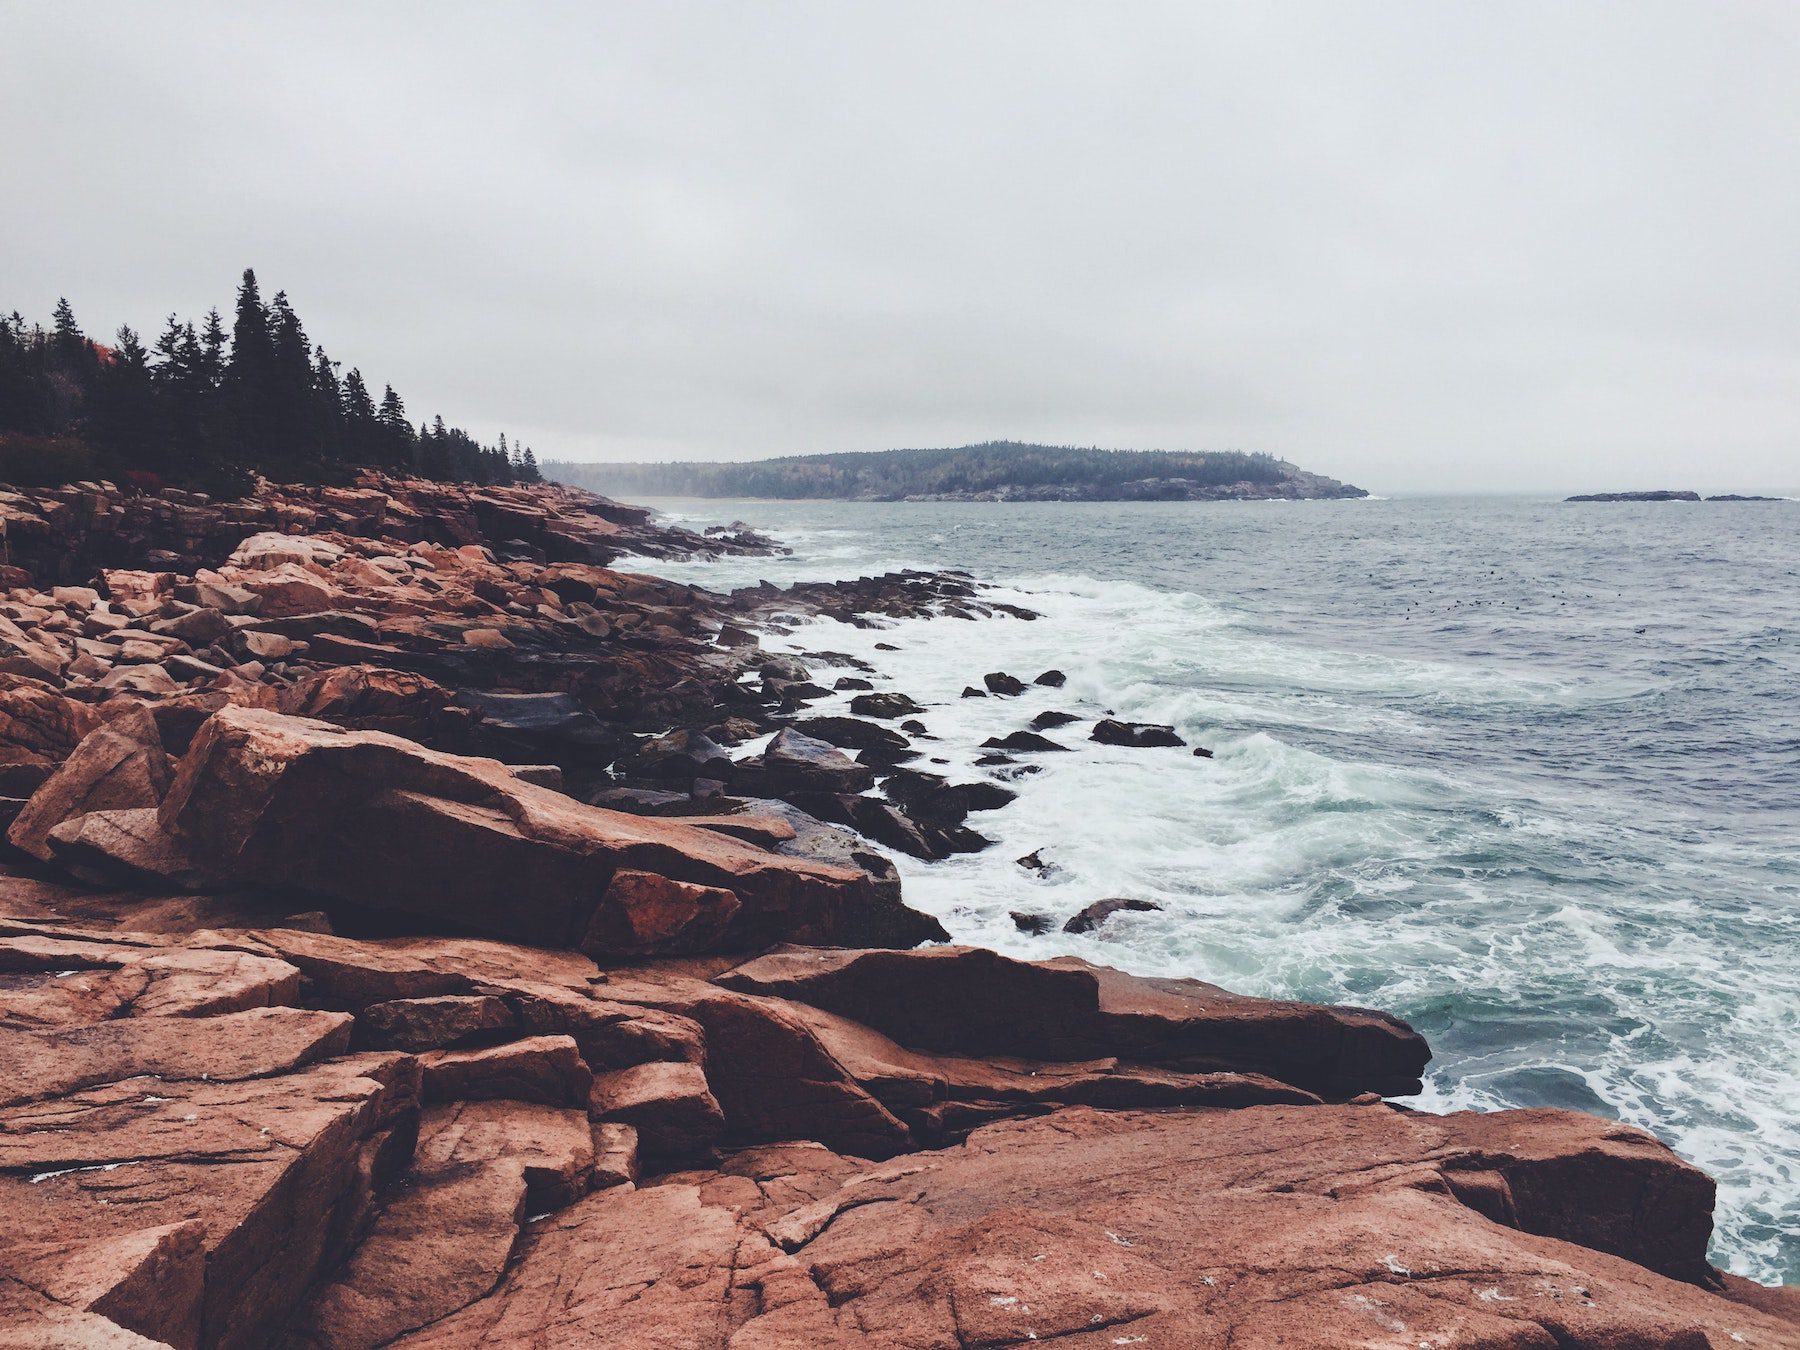 Rocky coastline and churning waters at Acadia National Park on an overcast day.